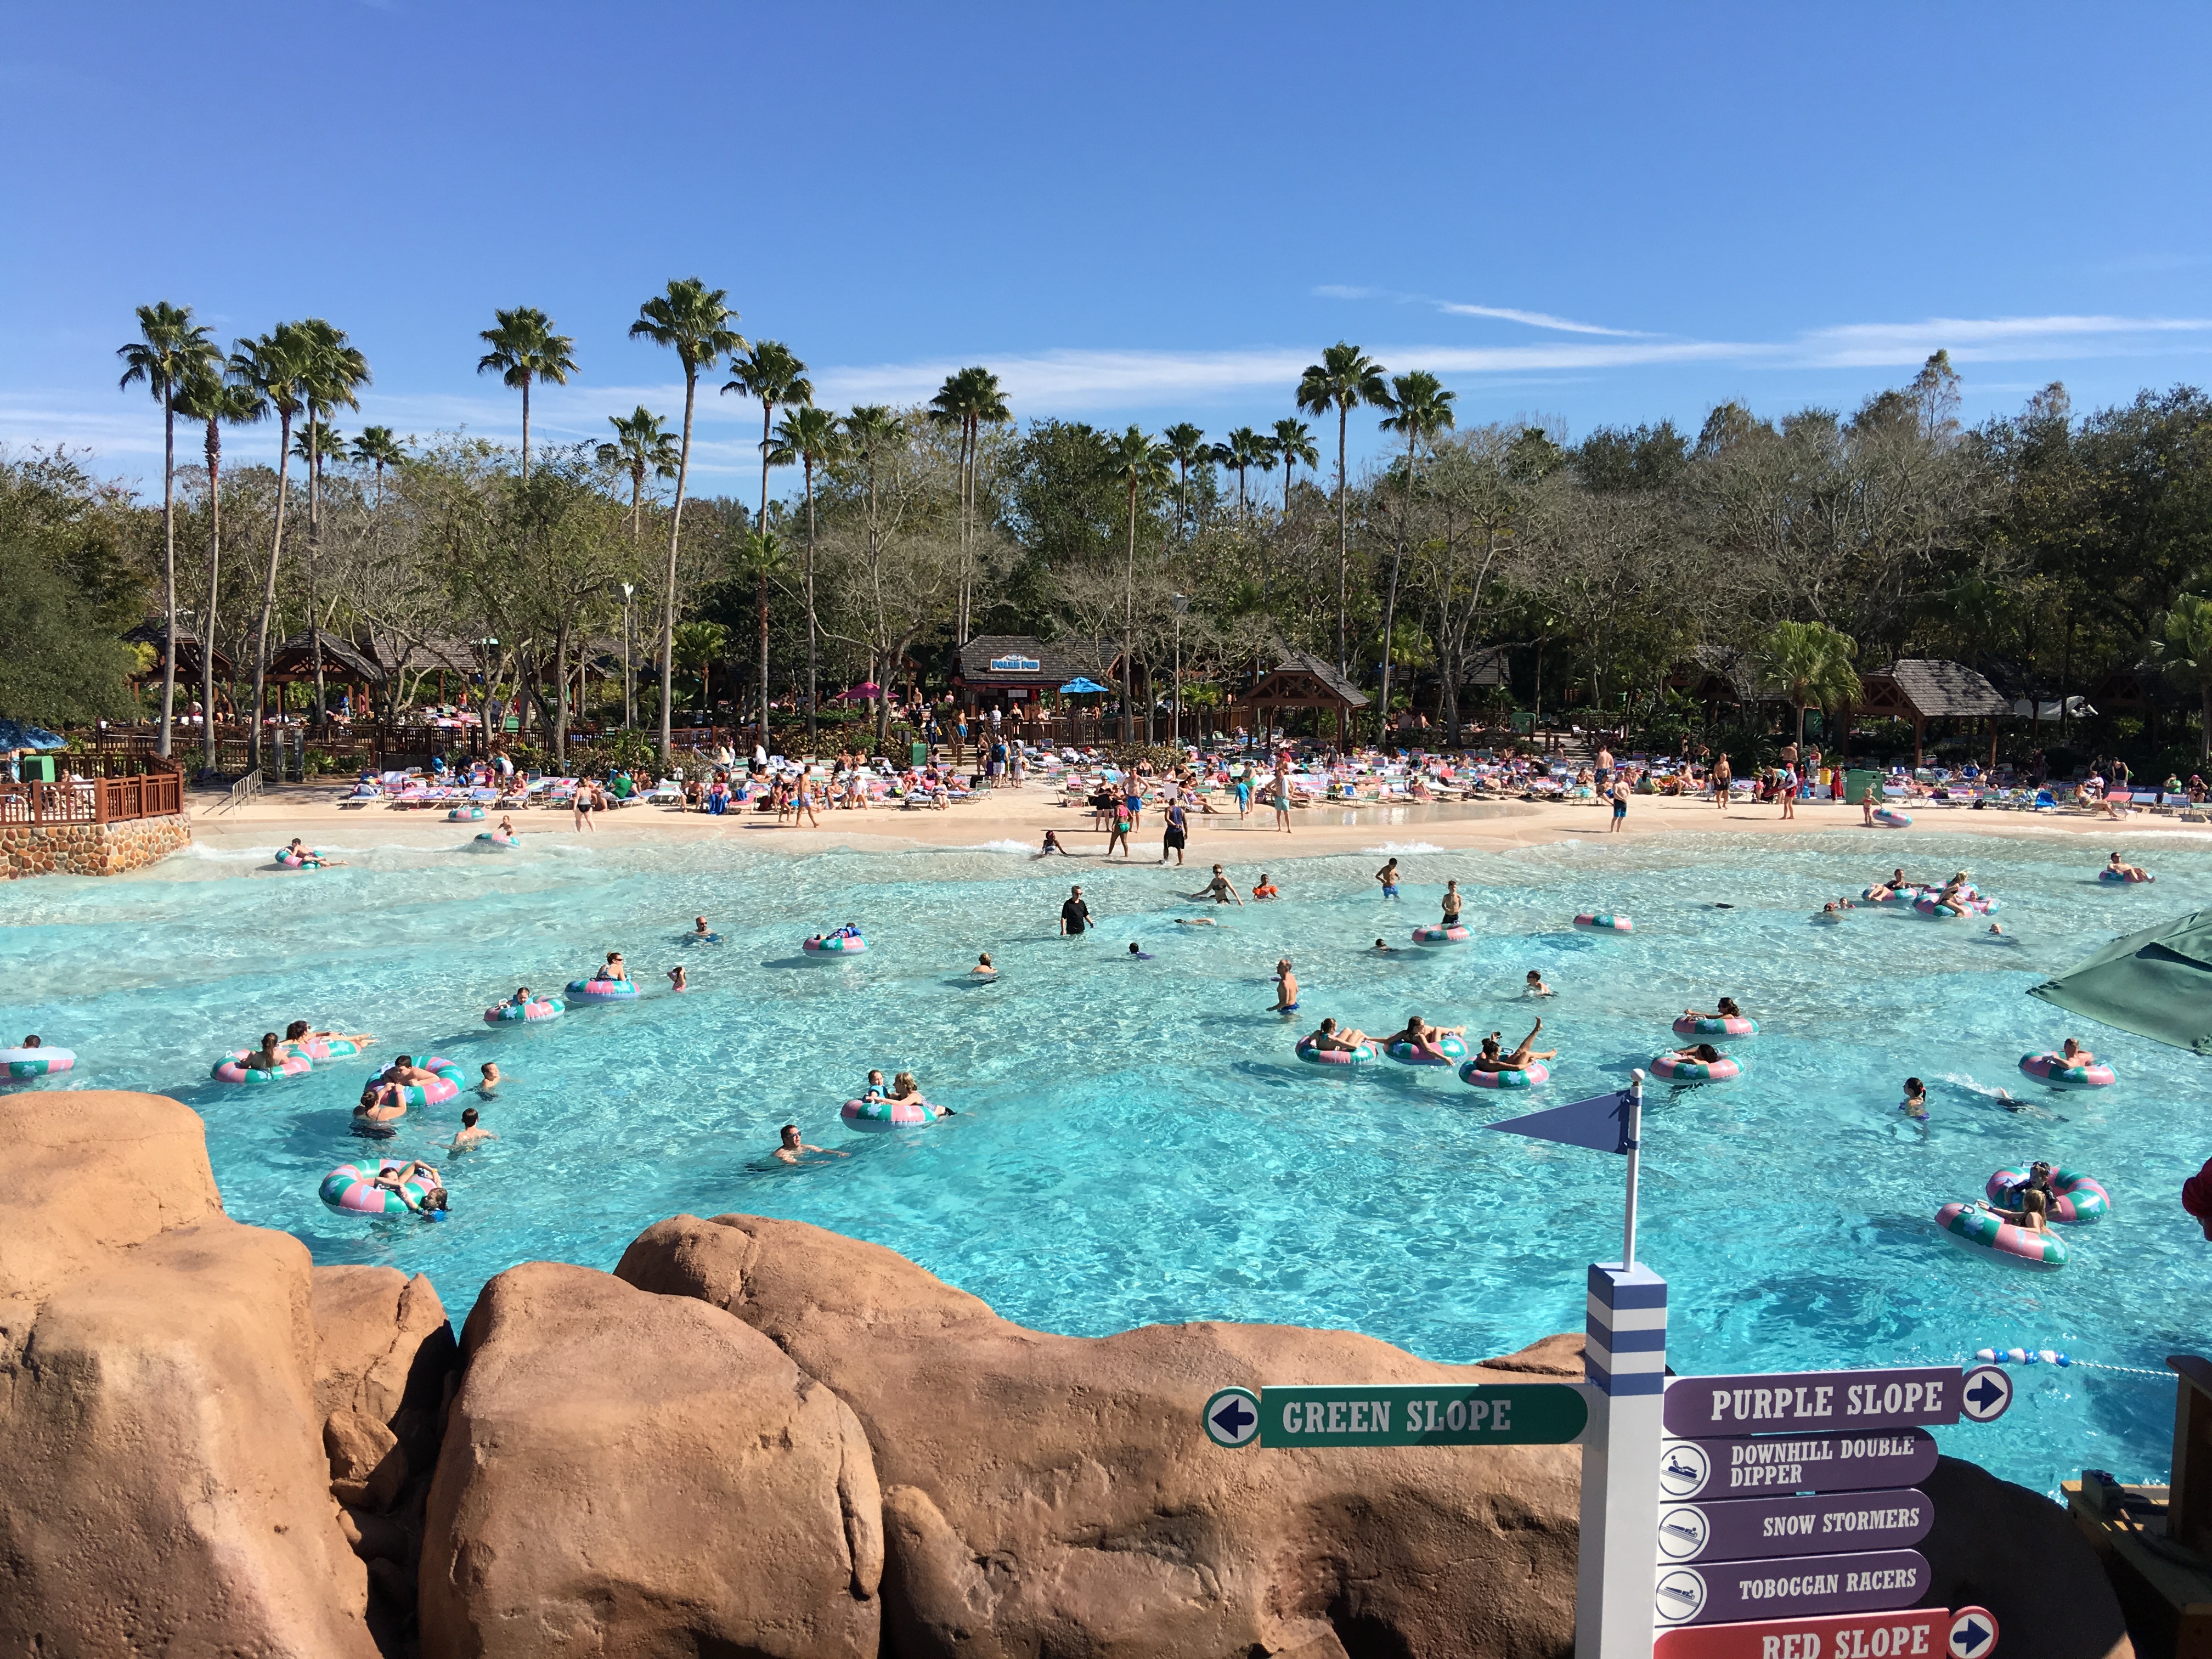 Blizzard Beach: A Photo Tour of Disney's Best-Themed Water ...